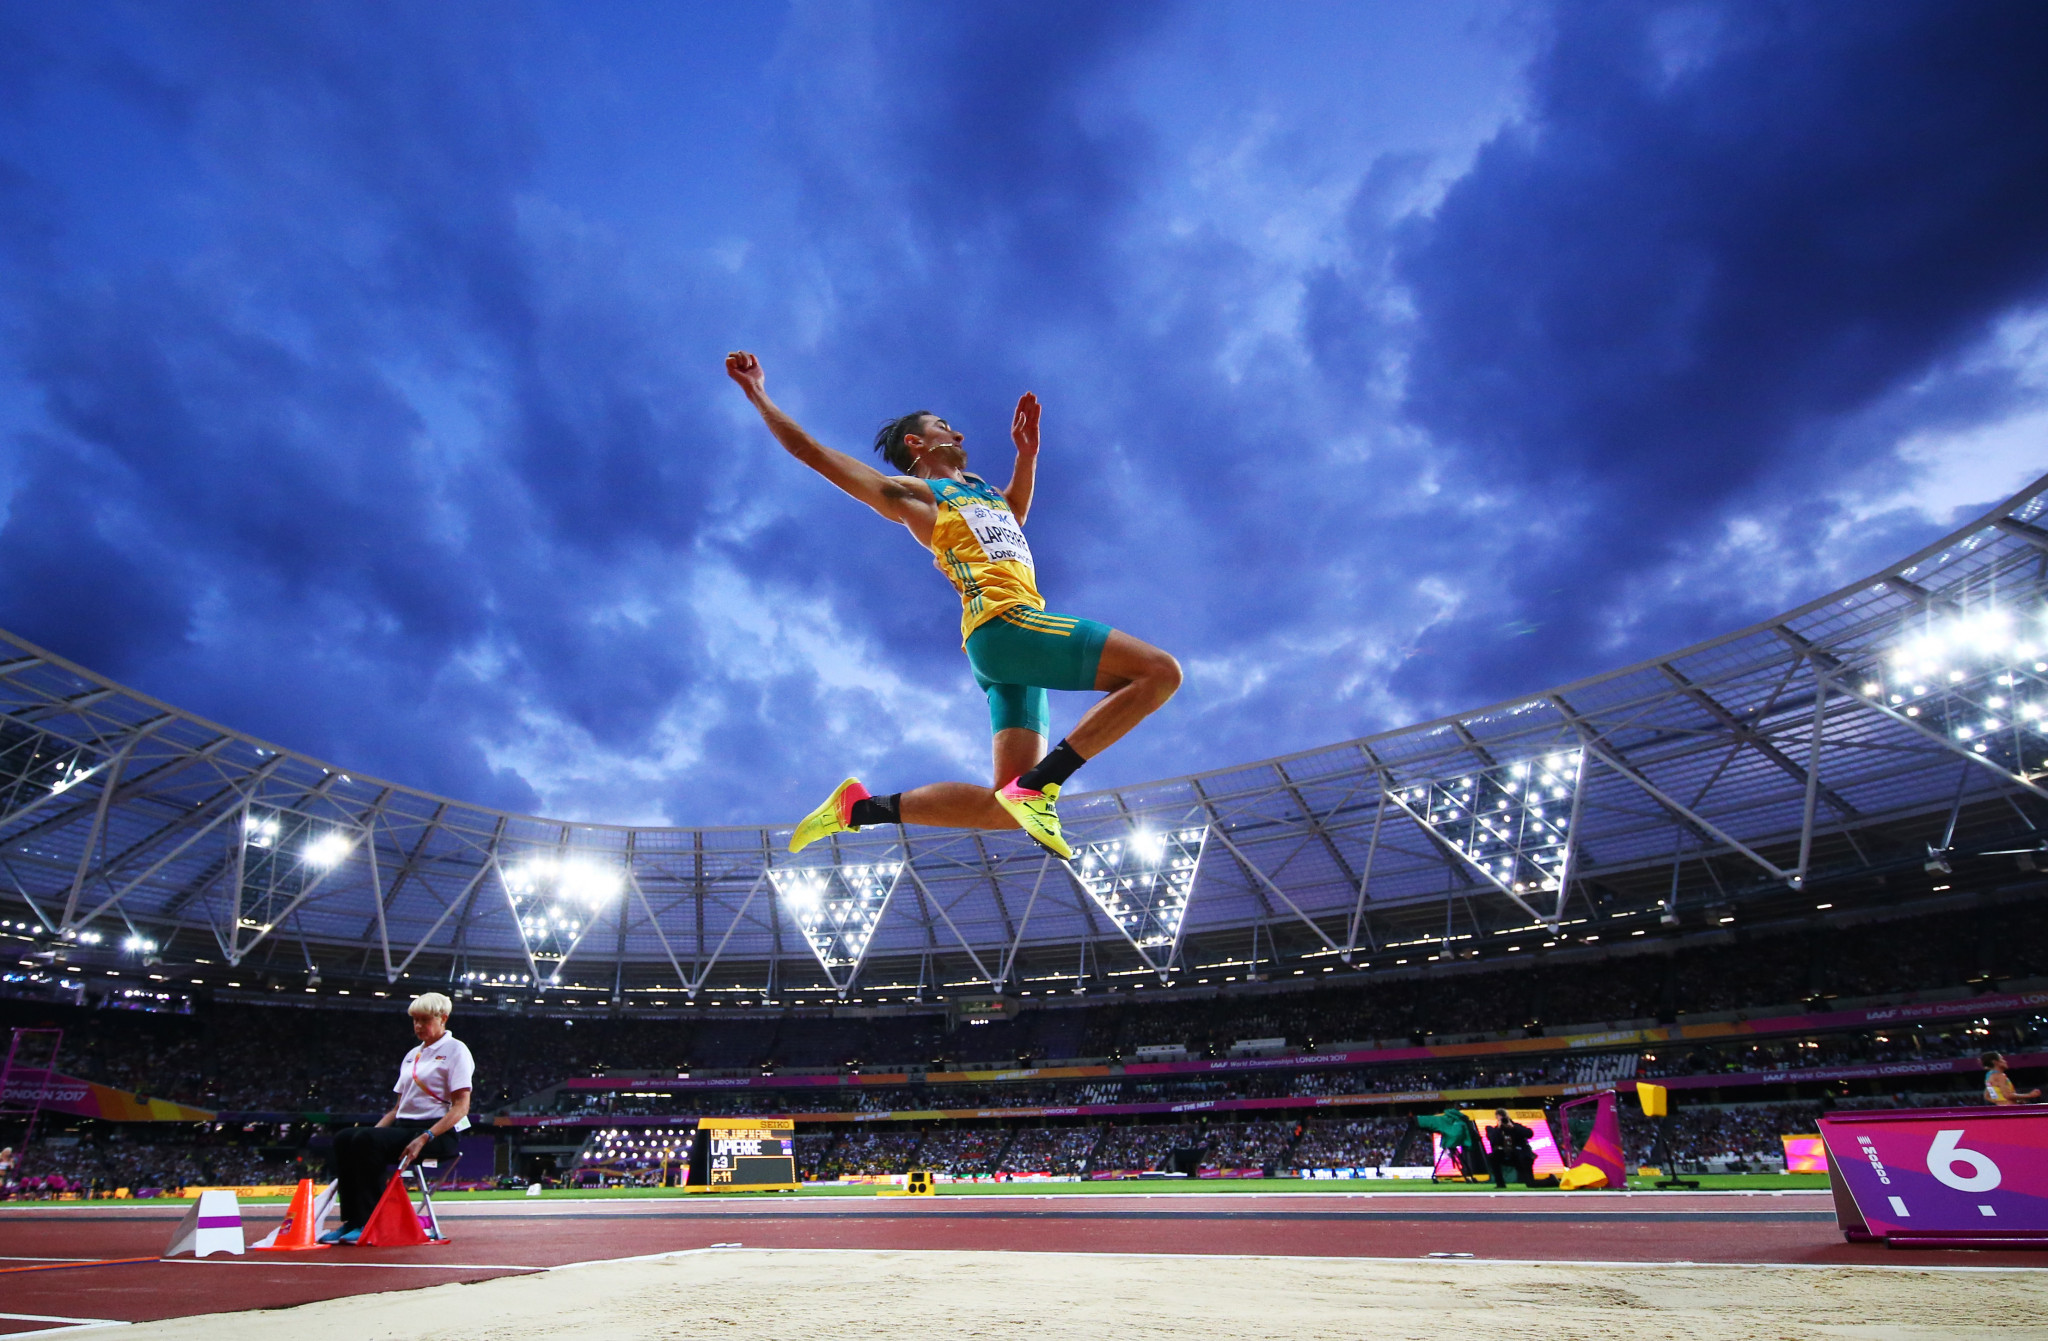 London Stadium hosted the World Athletics Championships in 2017 ©Getty Images